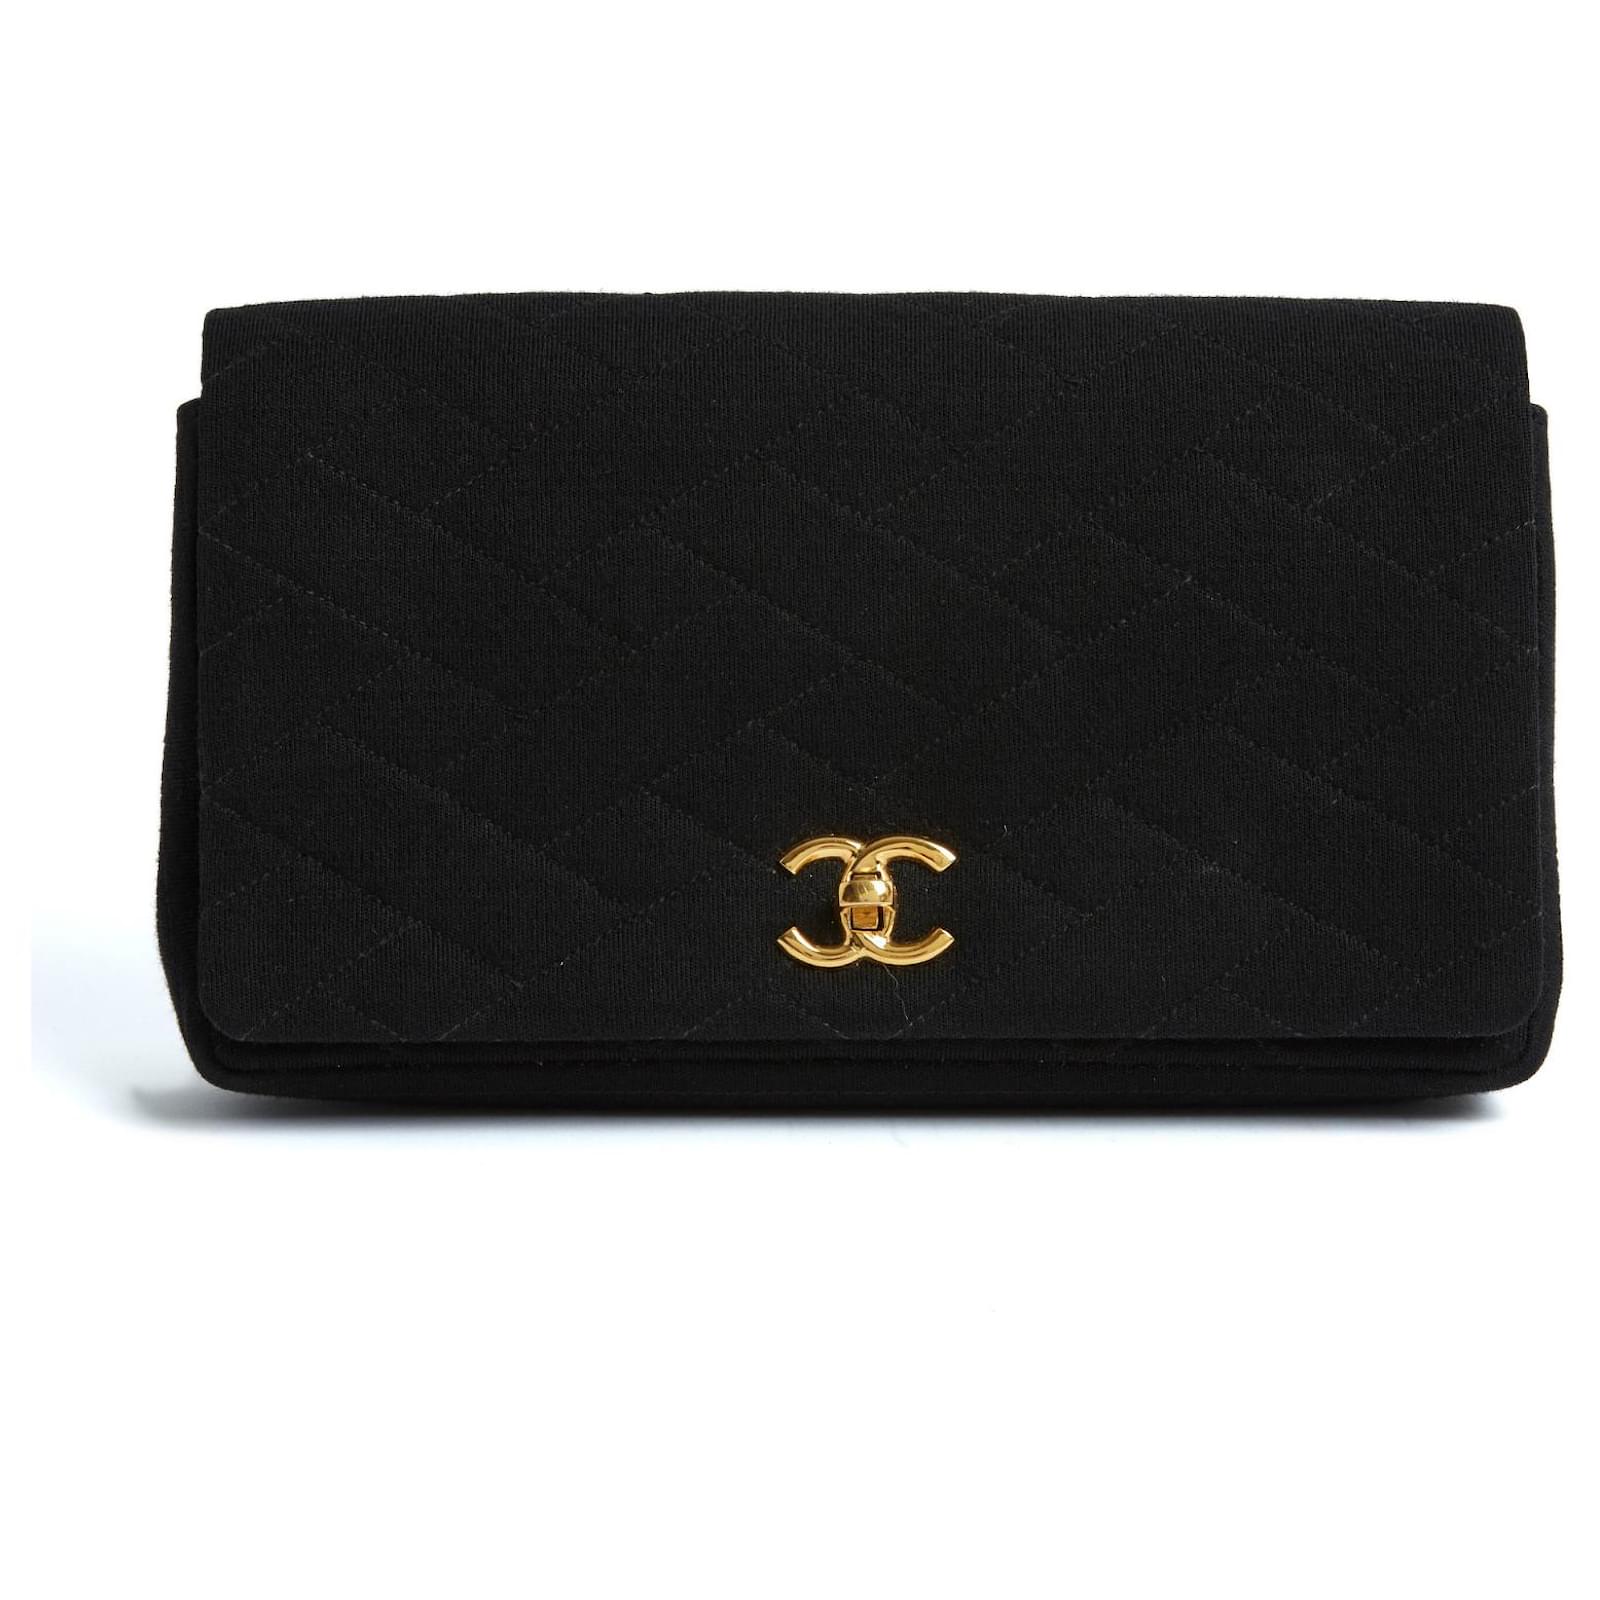 Clutch Bags Chanel Timeless Classic Black Jersey Clutch